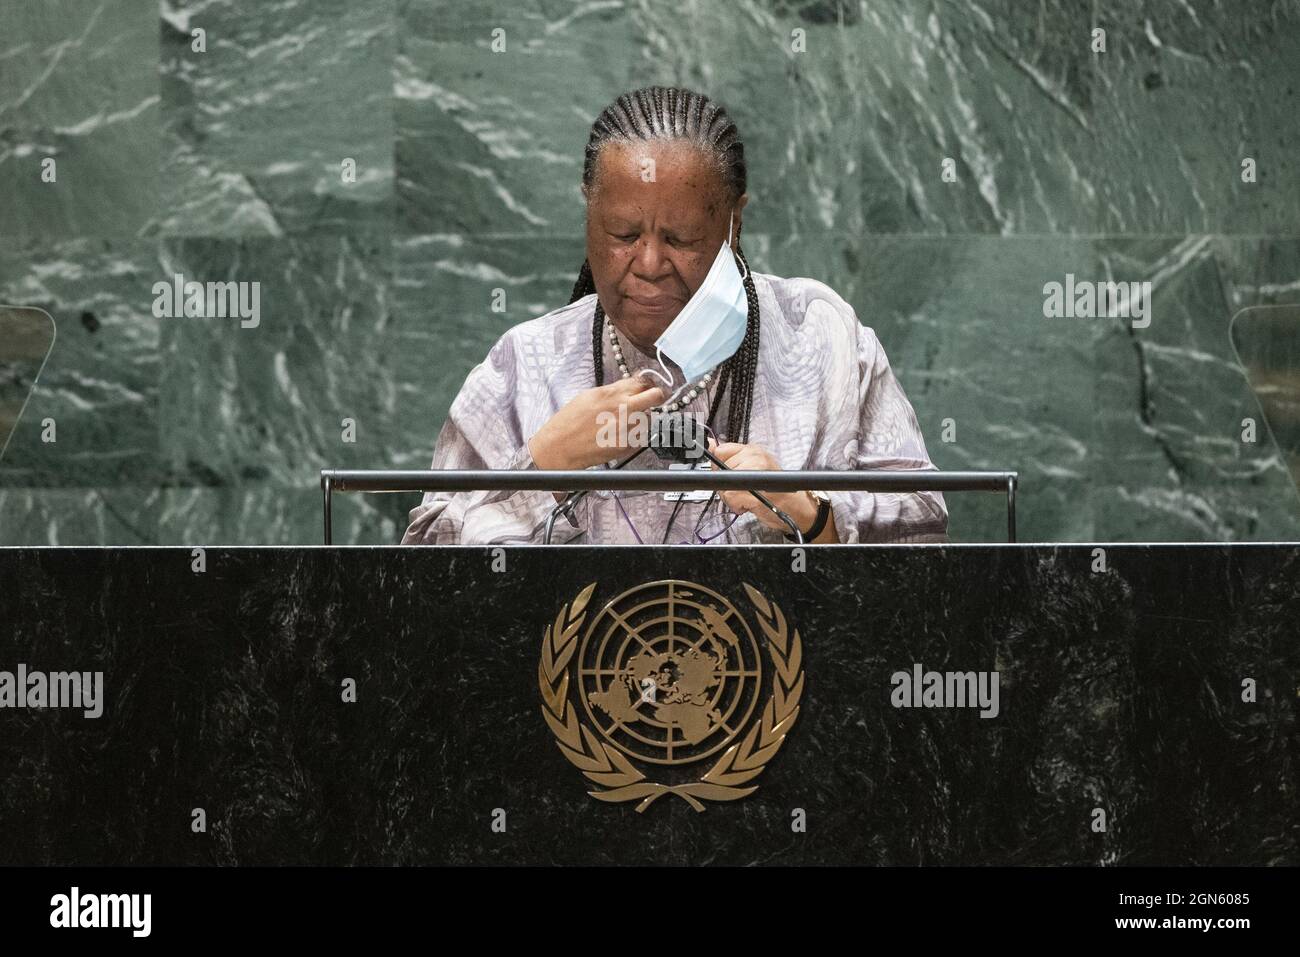 New York, United States. 22nd Sep, 2021. South Africa's Minister of International Relations and Cooperation Naledi Pandor addresses the UN General Assembly 76th session General Debate in UN General Assembly Hall at the United Nations Headquarters on Wednesday, September 22, 2021 in New York City. Pool Photo by Eduardo Munoz/UPI Credit: UPI/Alamy Live News Stock Photo